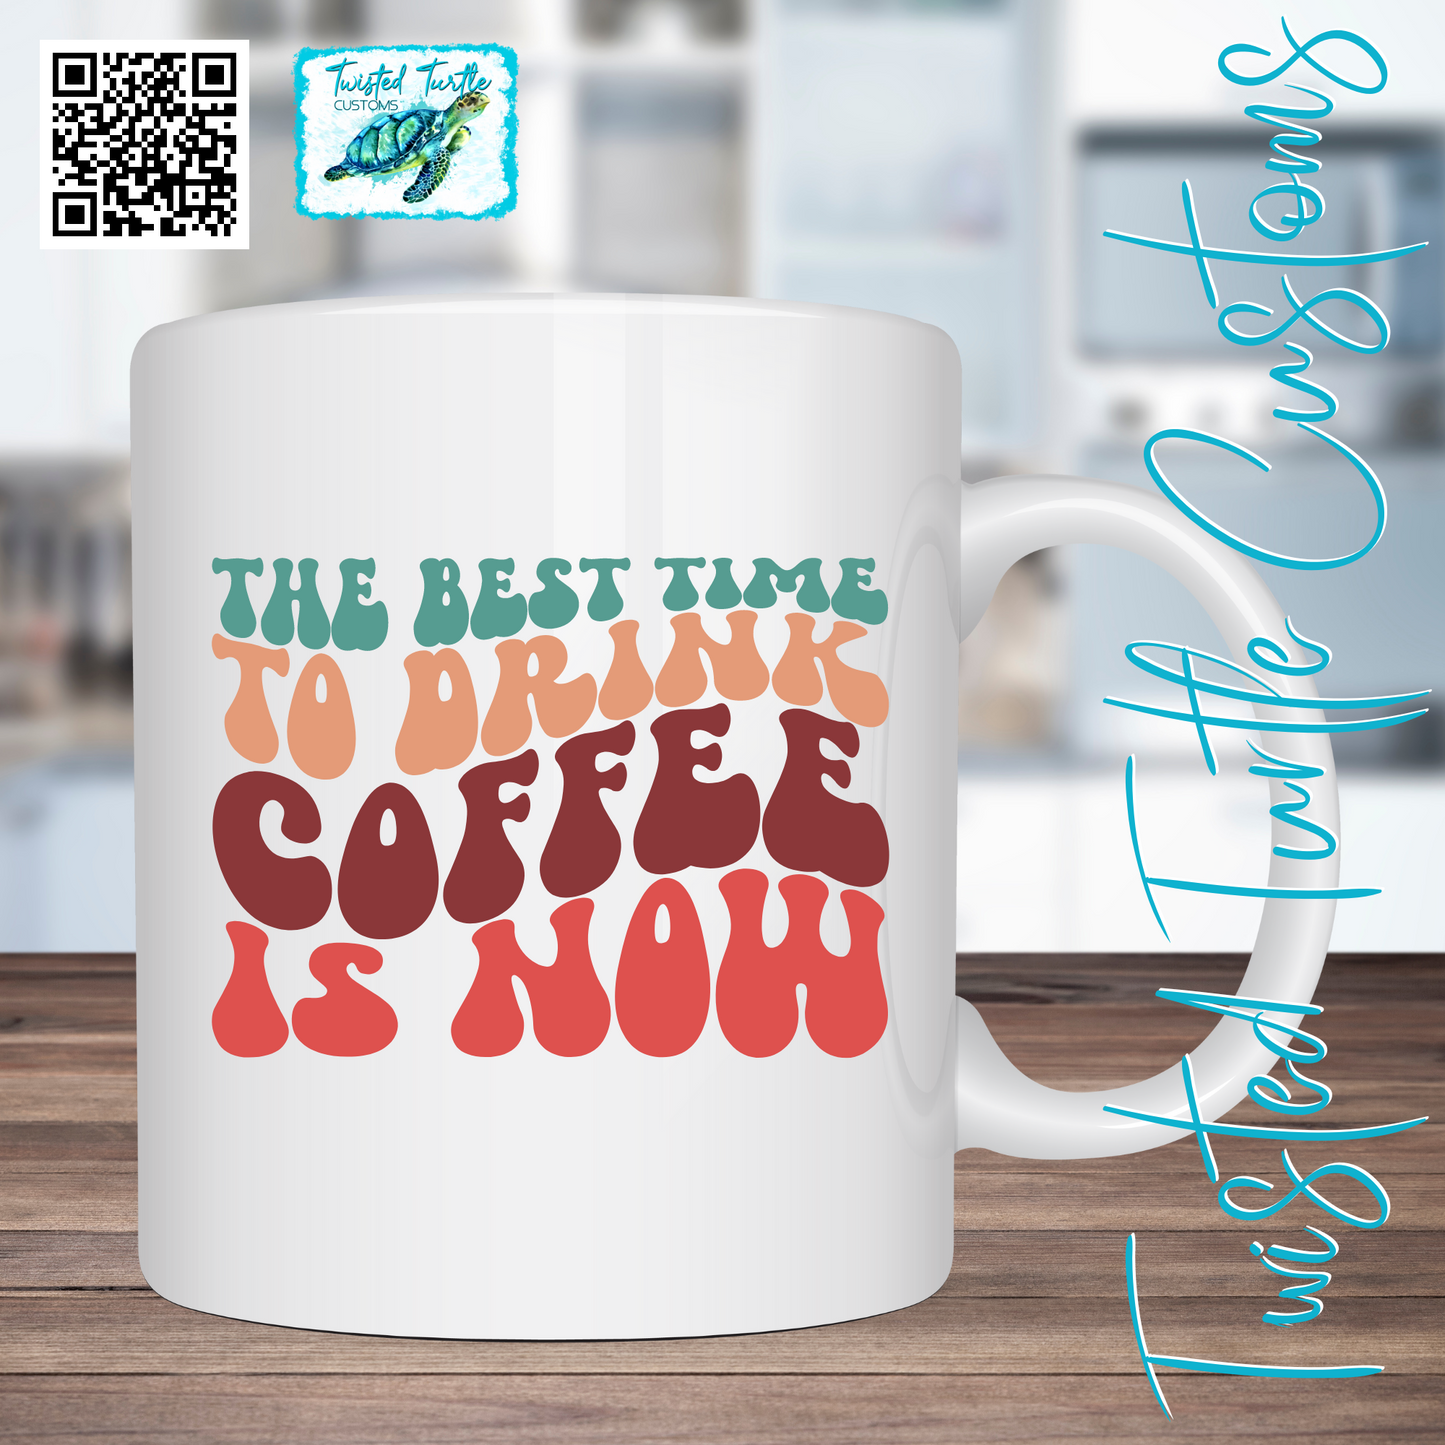 Fun Retro Lettering Coffee Mug “The best time to Drink Coffee is Now”